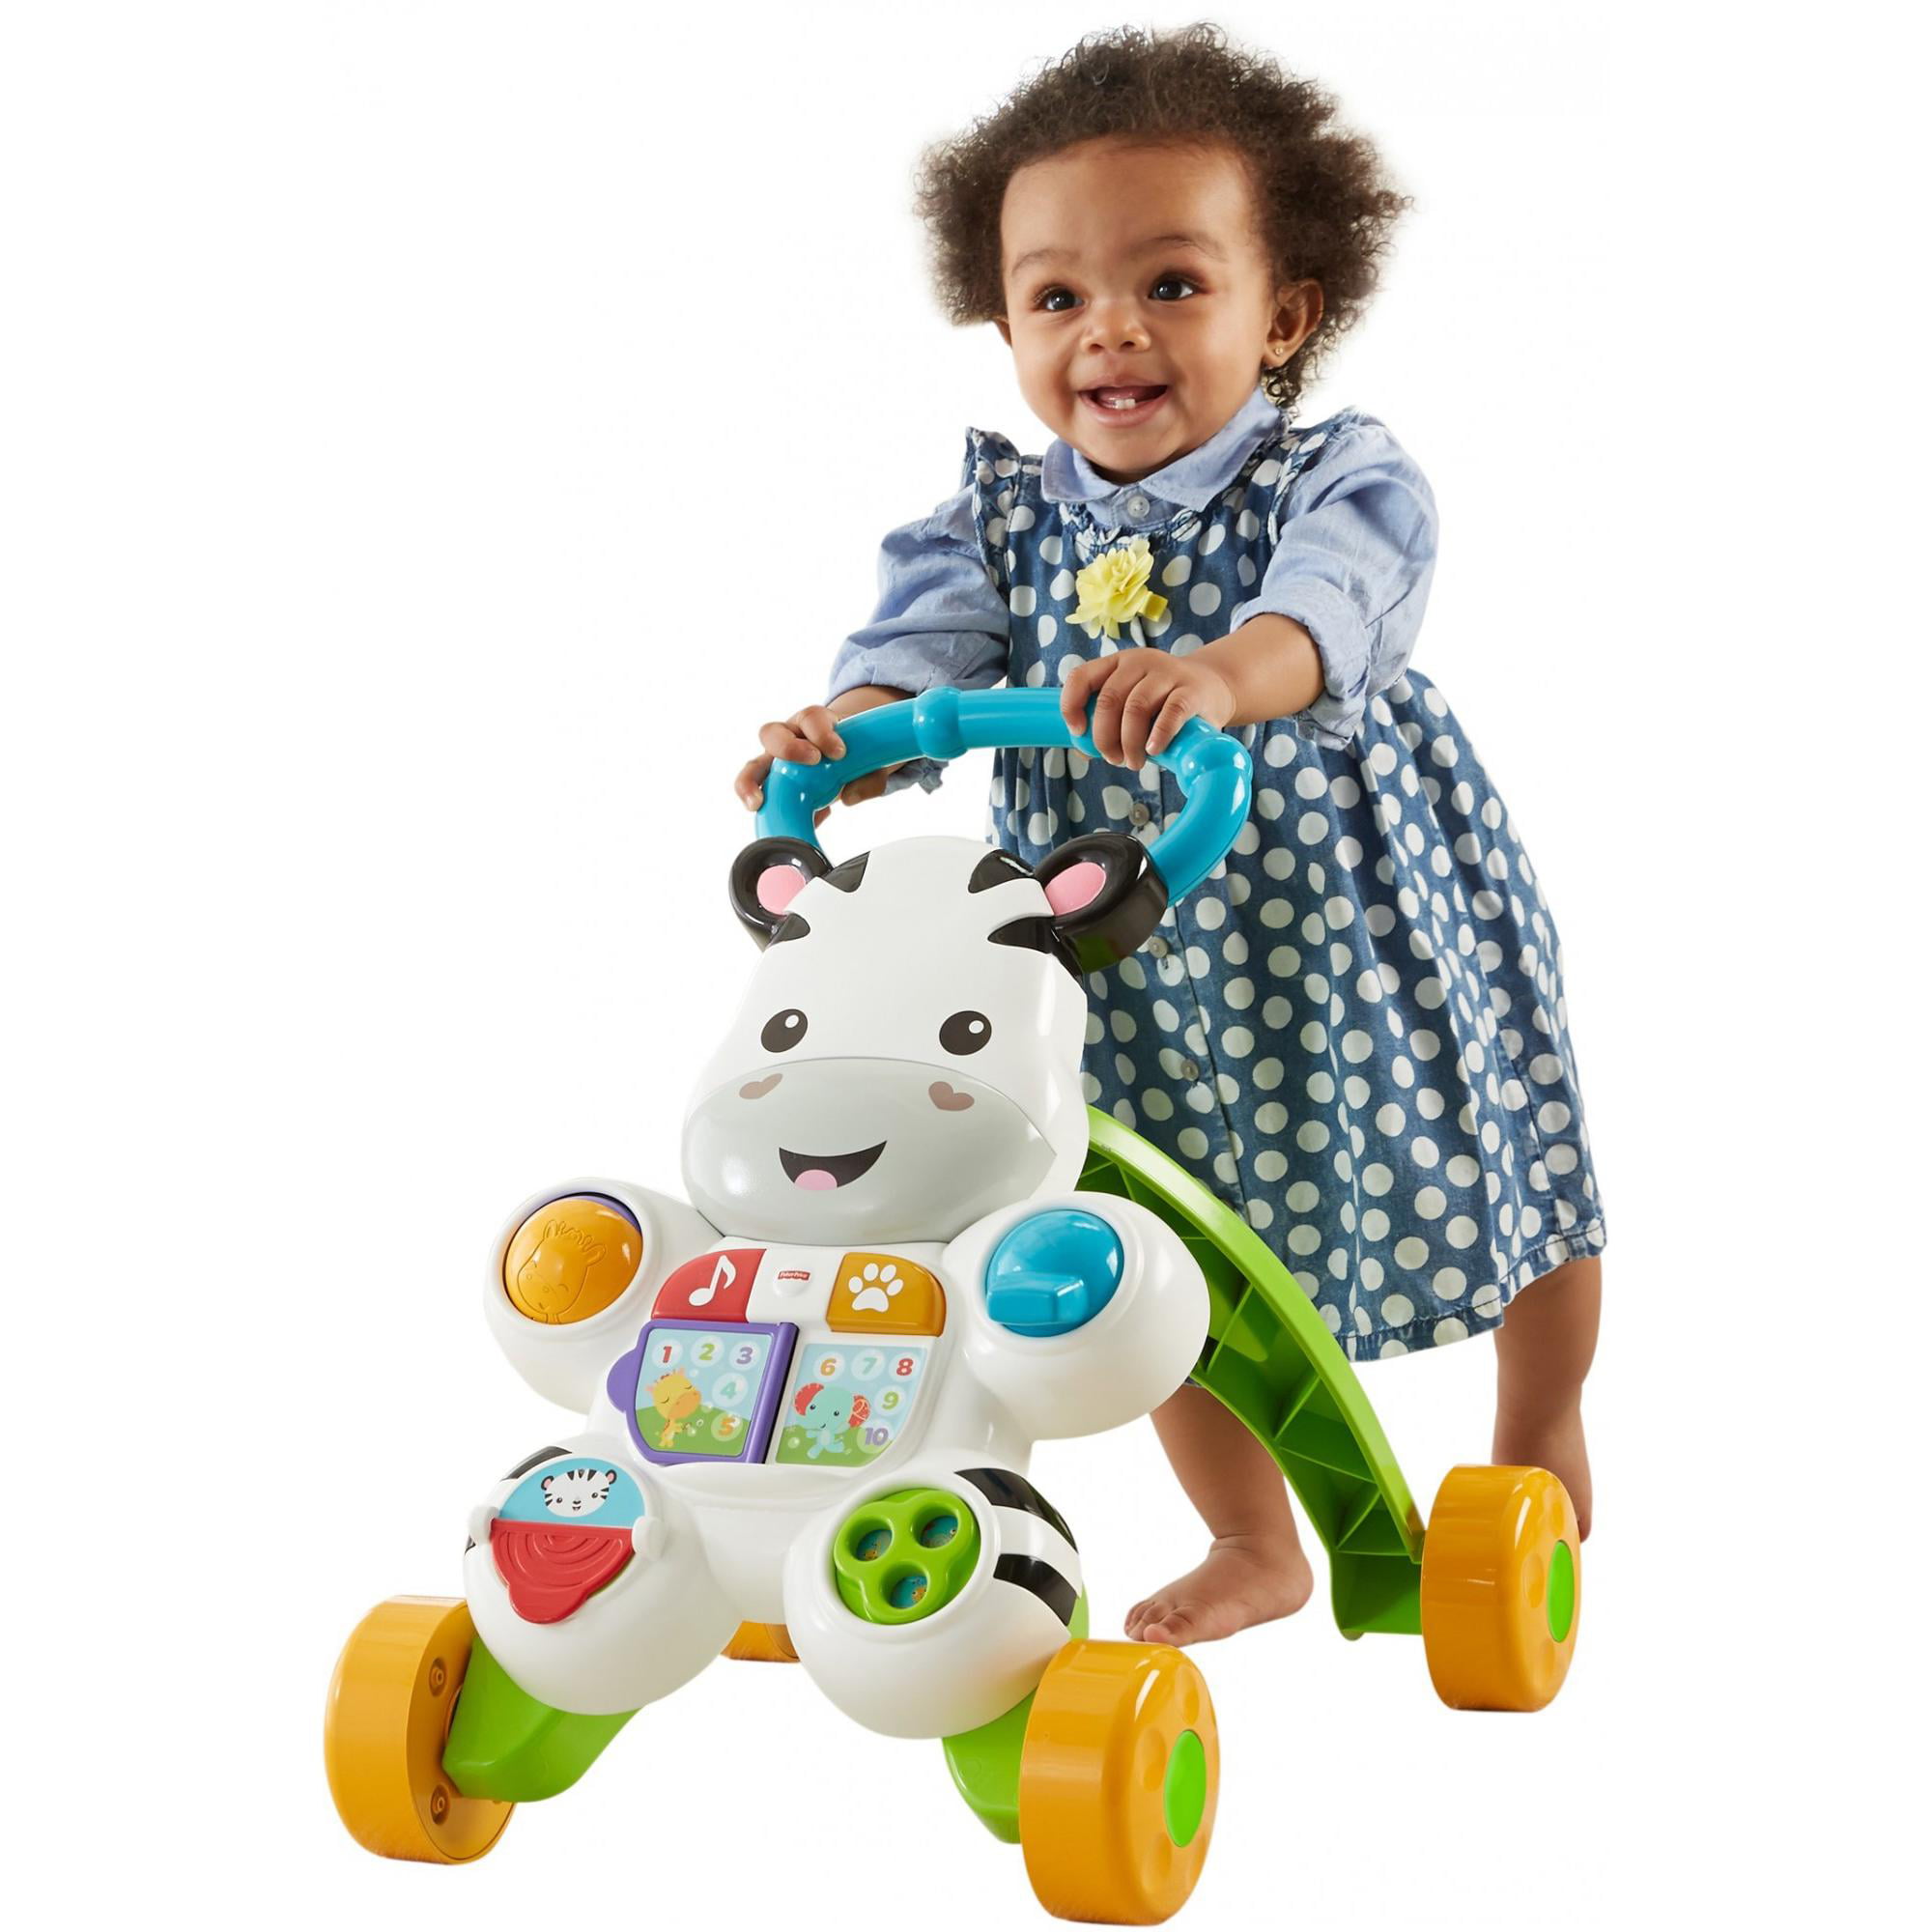 fisher price learn to walk